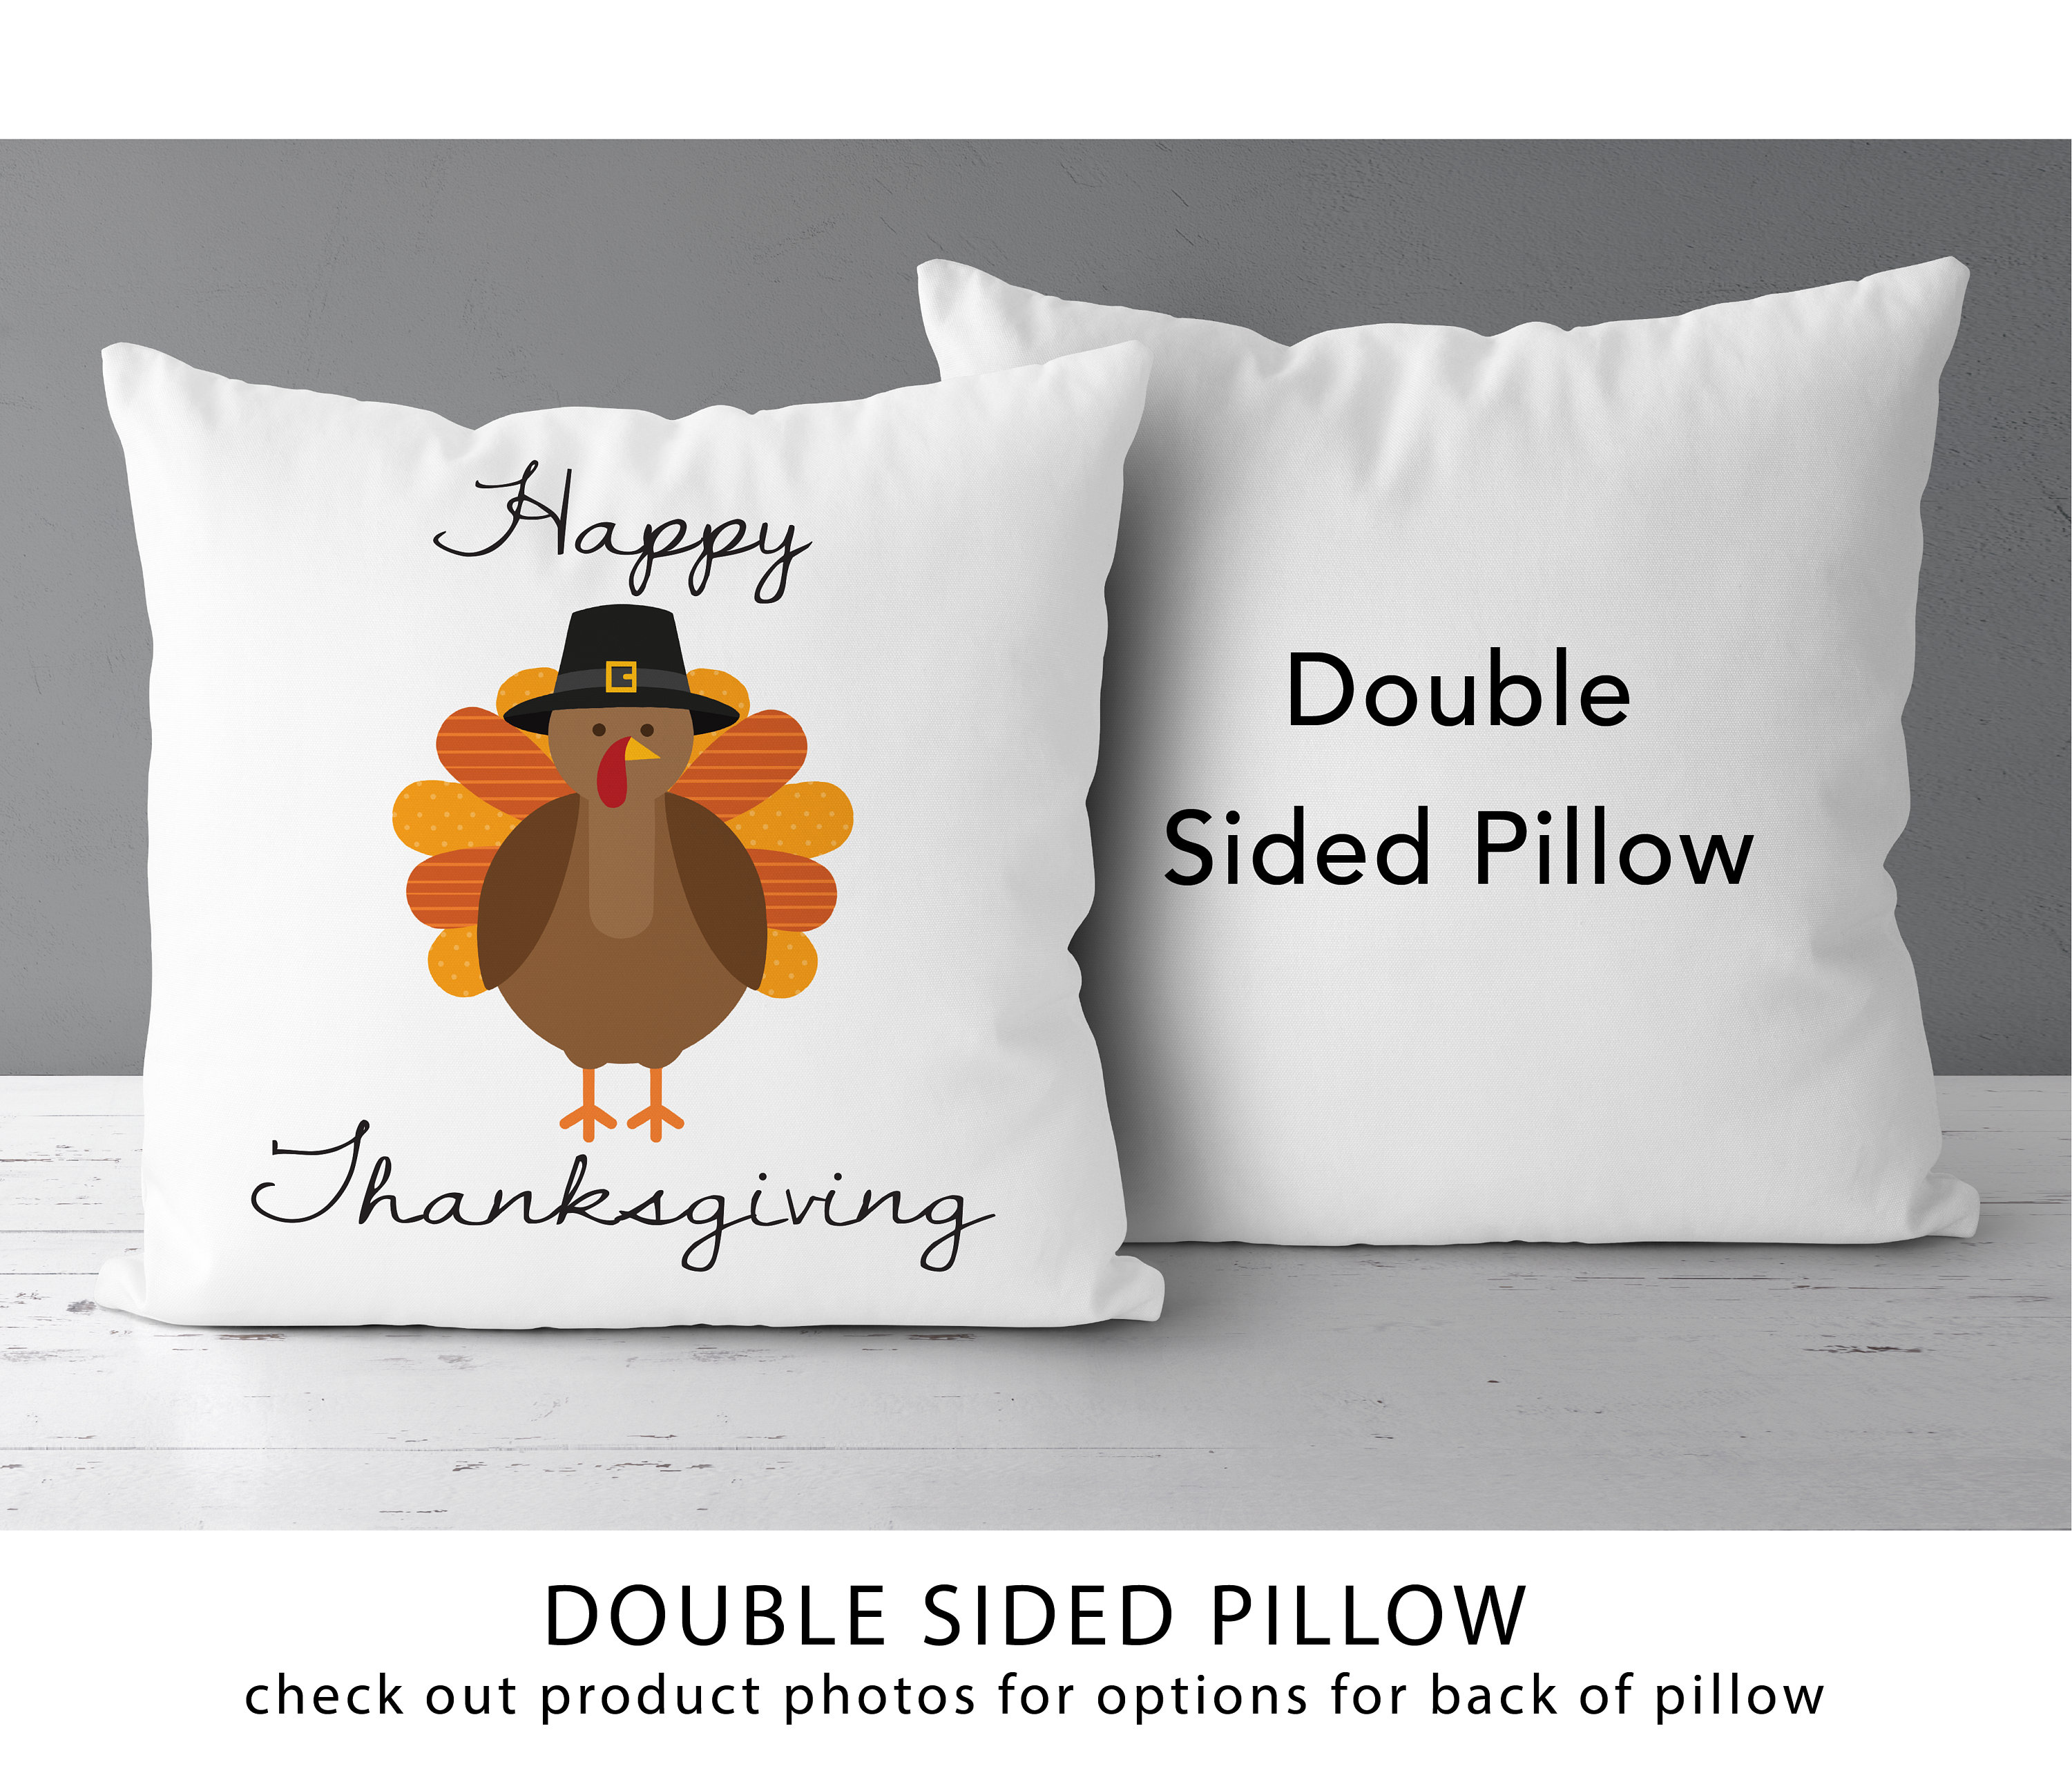 Halloween Pillow Covers 18x18 Set of 4 Happy Fall Pumpkin Halloween Pillows  Decorative Autumn Thanksgiving Quotes Thankful Grateful Blessed Throw